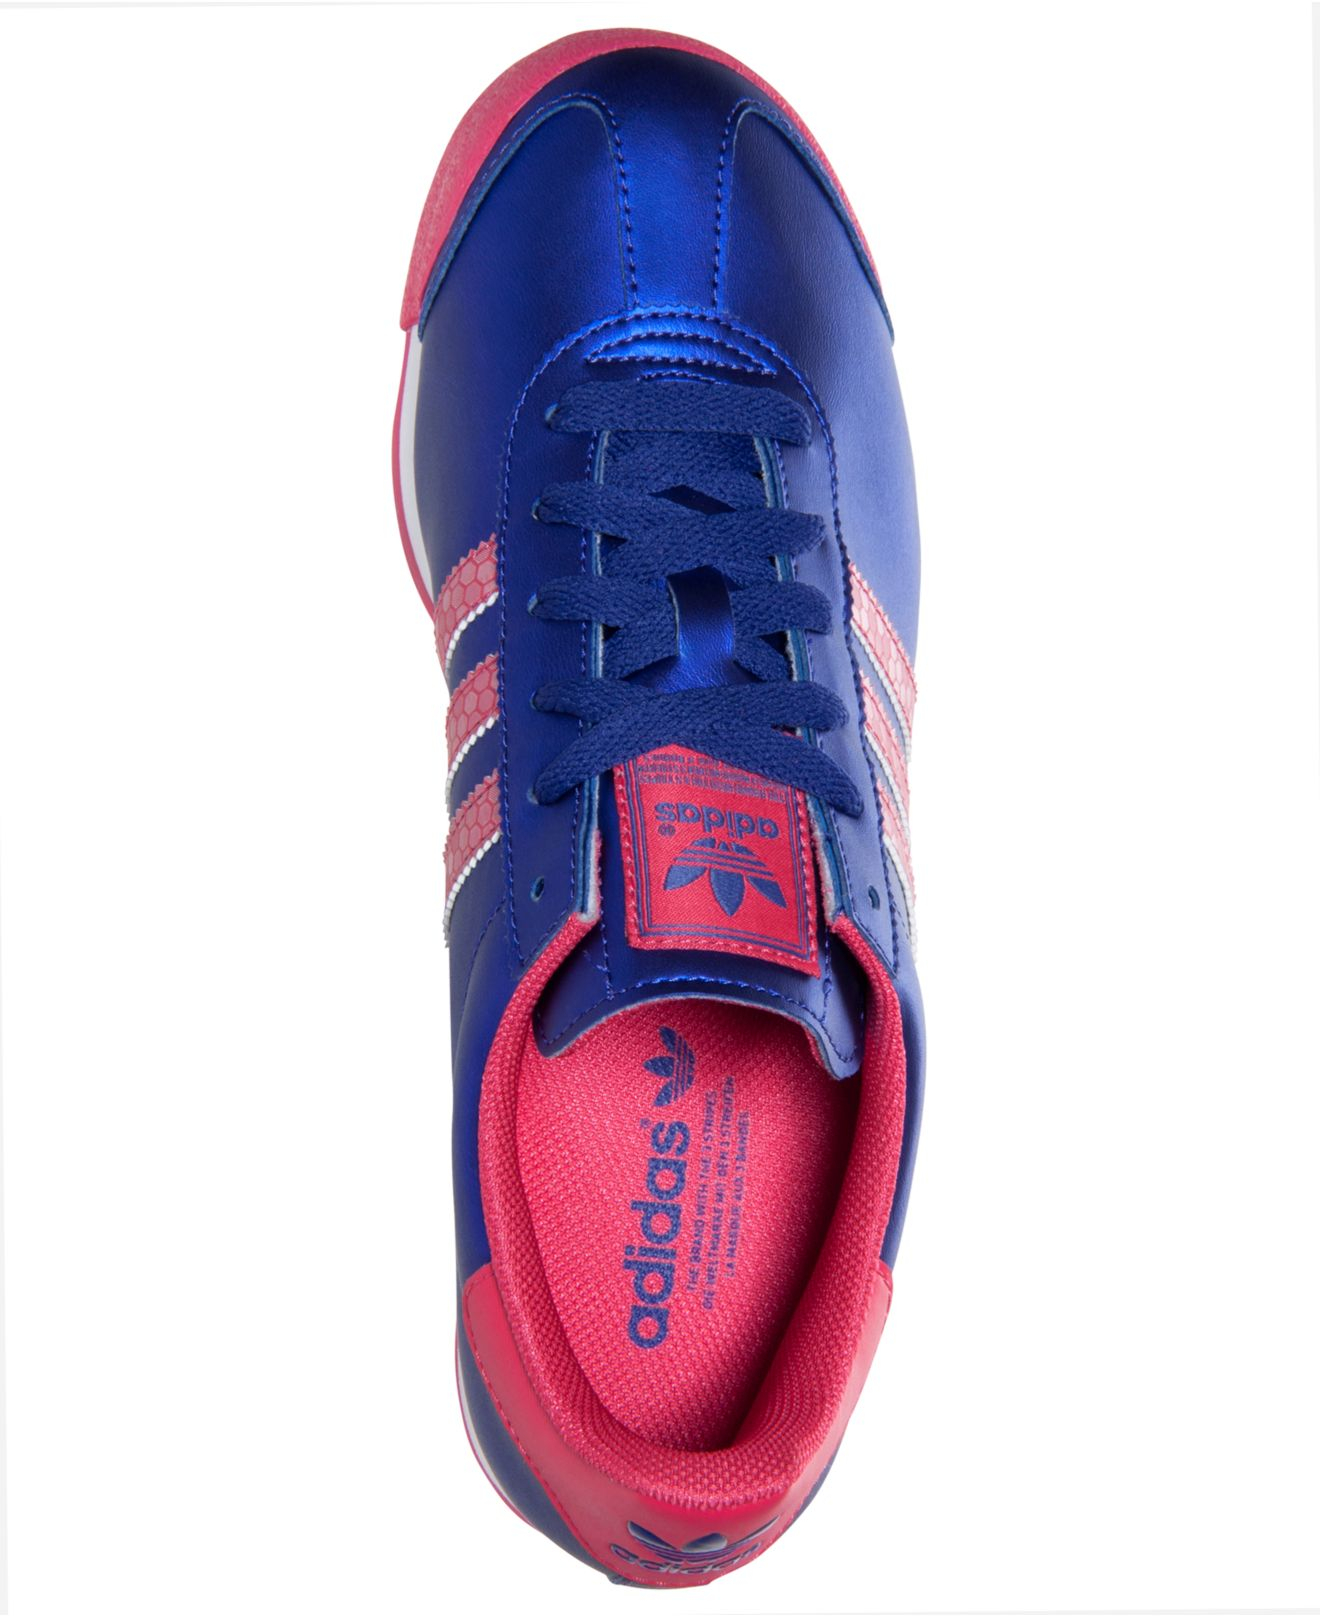 adidas Samoa Sneakers in Blue - Lyst